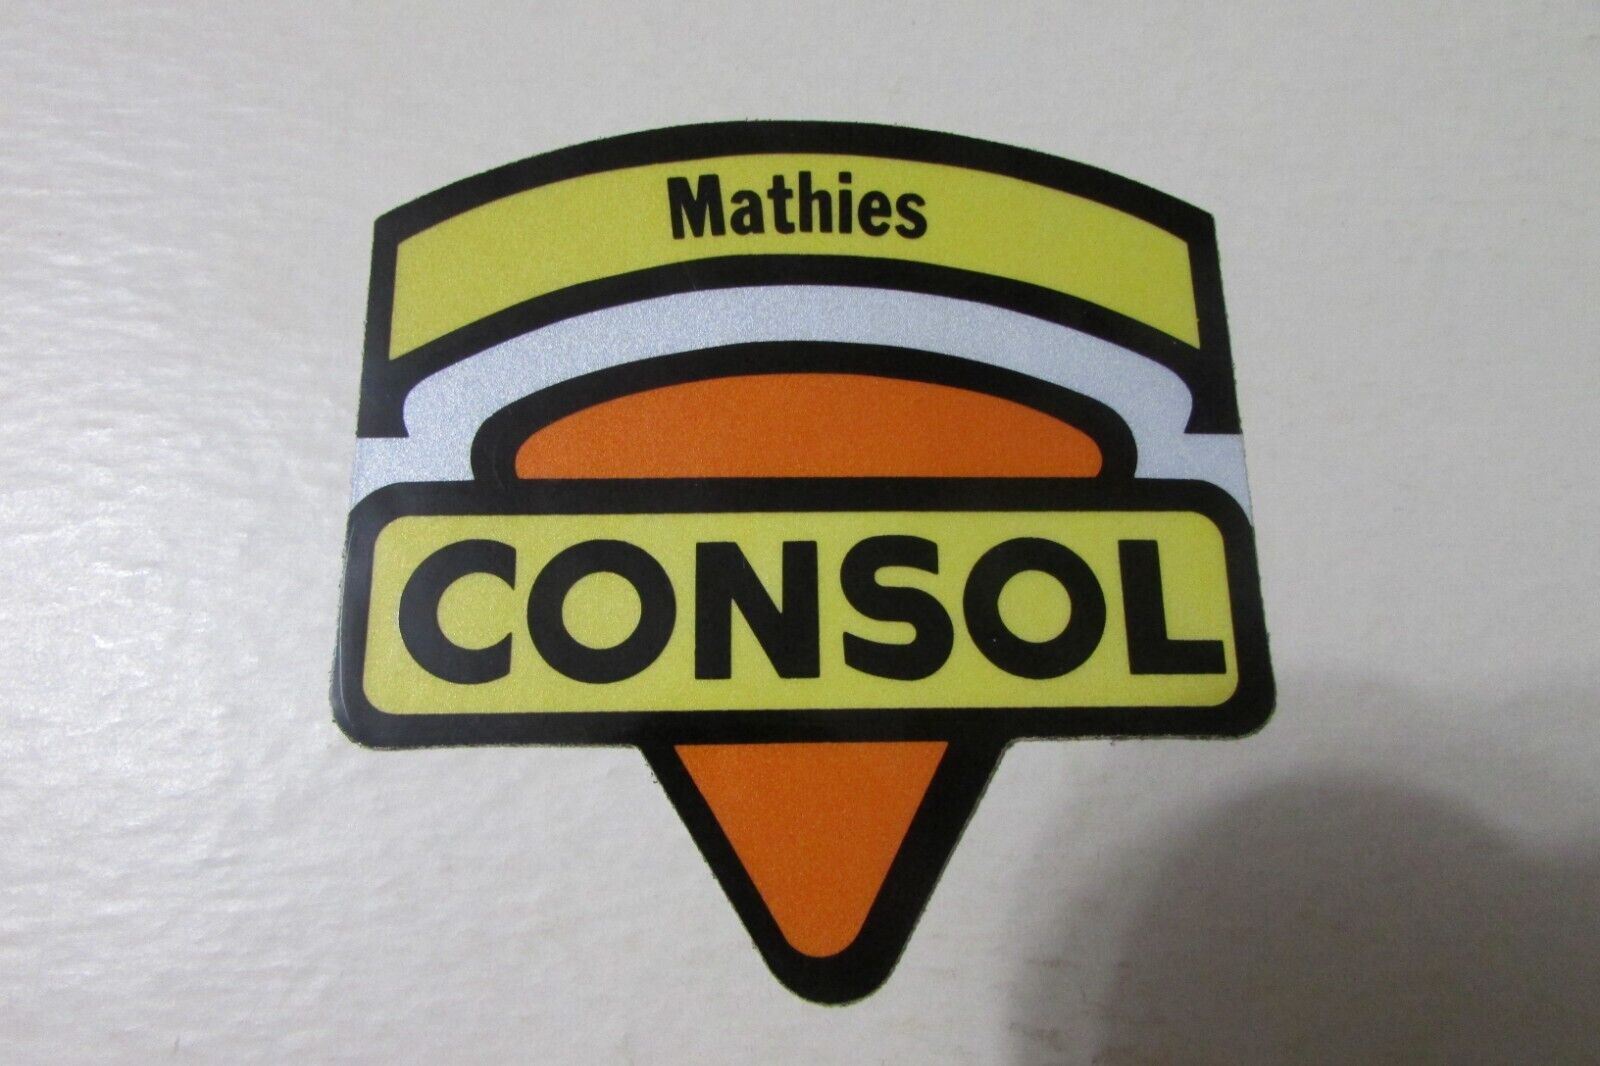 CONSOL COAL CO Mathies - COAL MINING STICKER-DECAL - WHITE BACK -